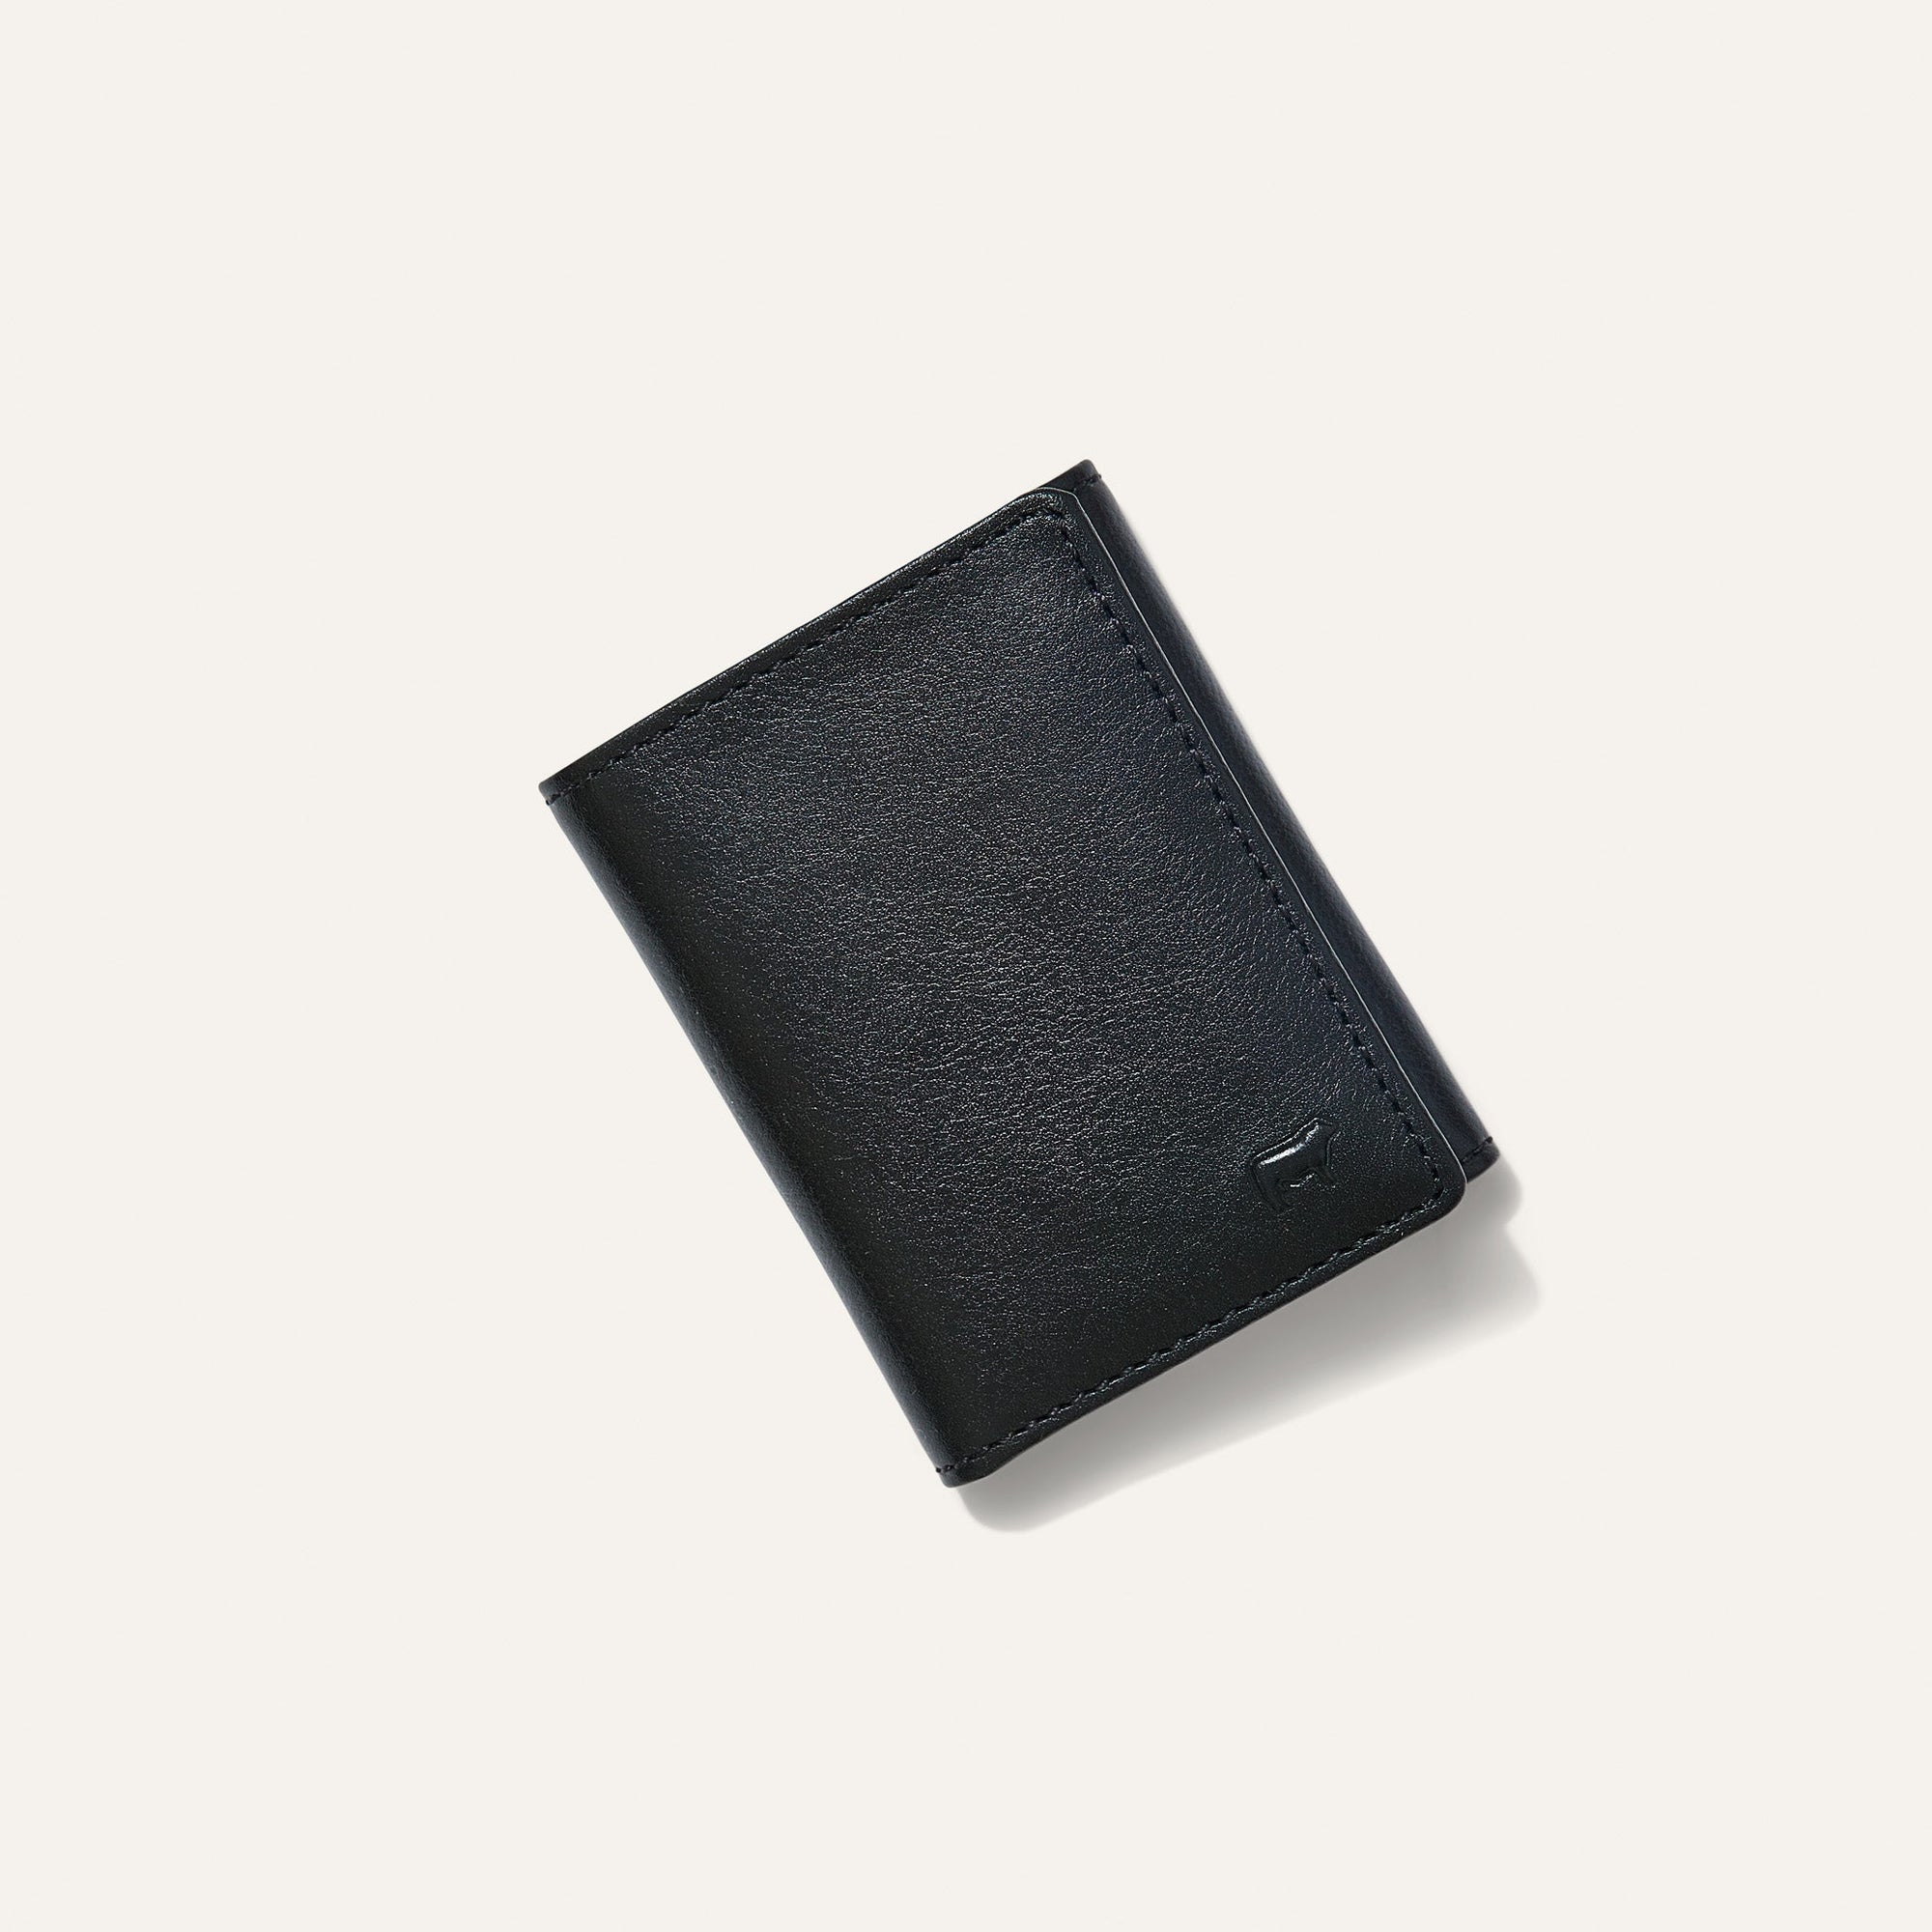 Classic Trifold Leather Wallet in Black by Will Leather Goods